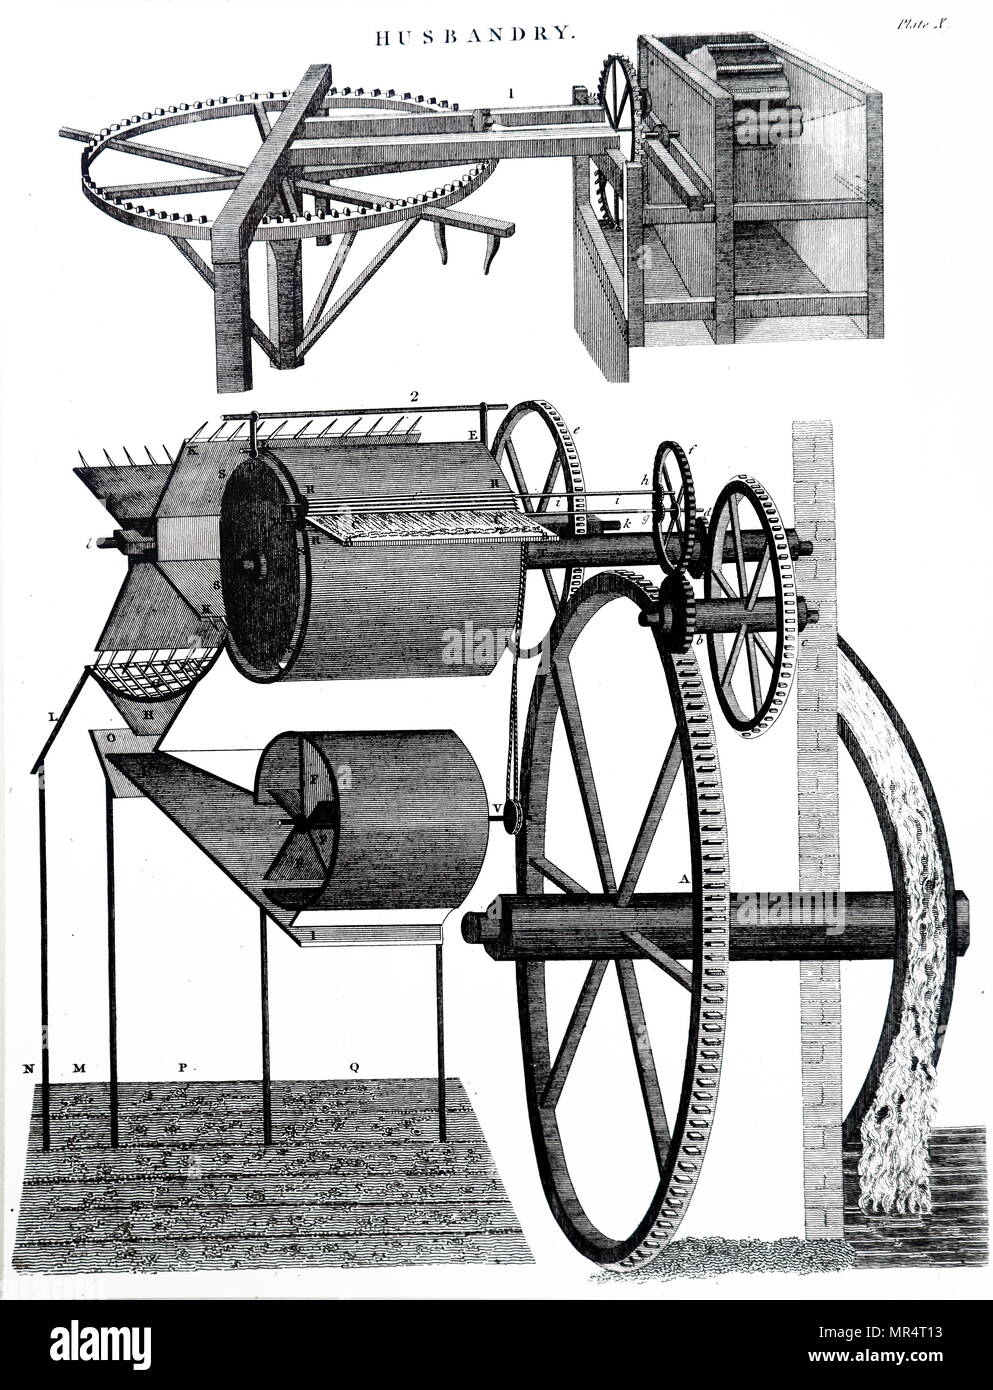 Engraving depicting Andrew Meikle's threshing machine which was used to remove the outer husks from grains of wheat. Top: horse-powered machine. Bottom: improved version powered by a water wheel. Andrew Meikle (1719-1811) a Scottish mechanical engineer credited with inventing the threshing machine. Dated 19th century Stock Photo